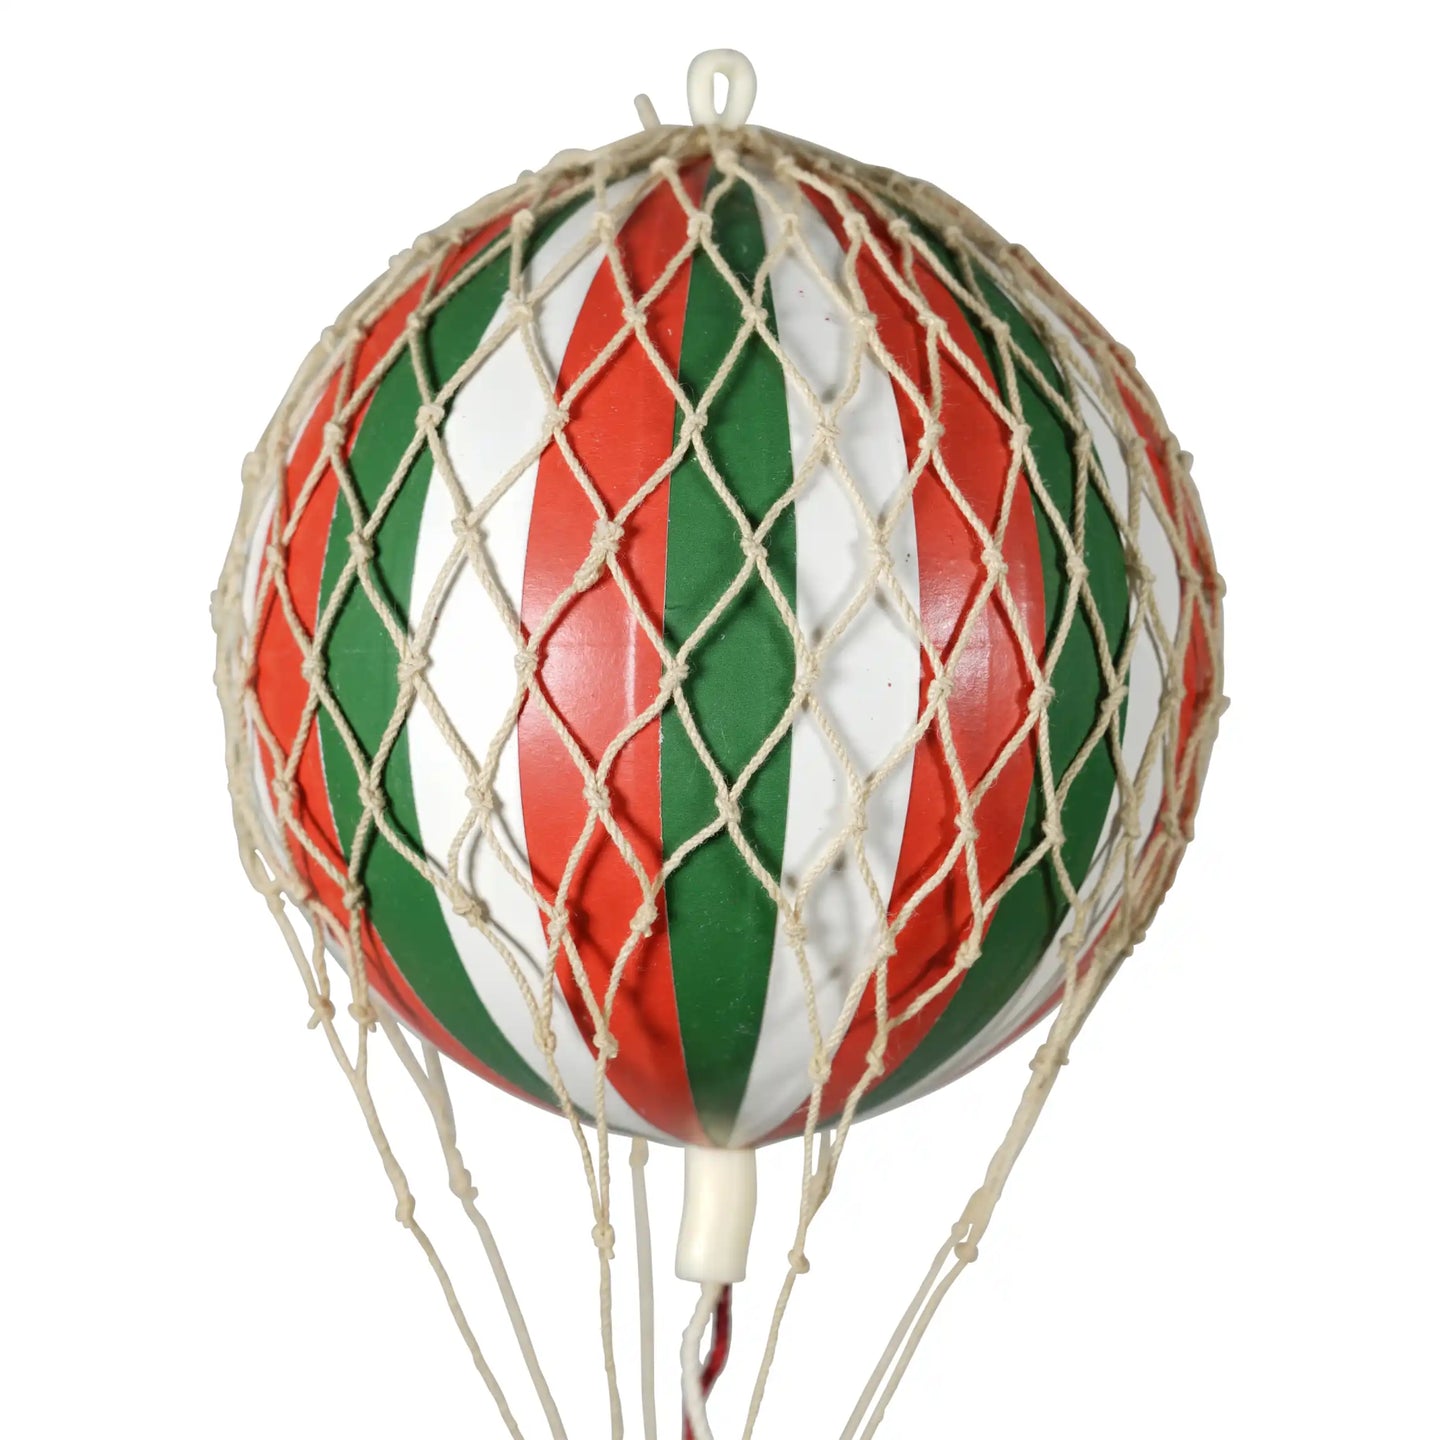 Authentic Models Floating The Skies Air Balloon 5.12 x 3.35 in, Tricolore - AP160I